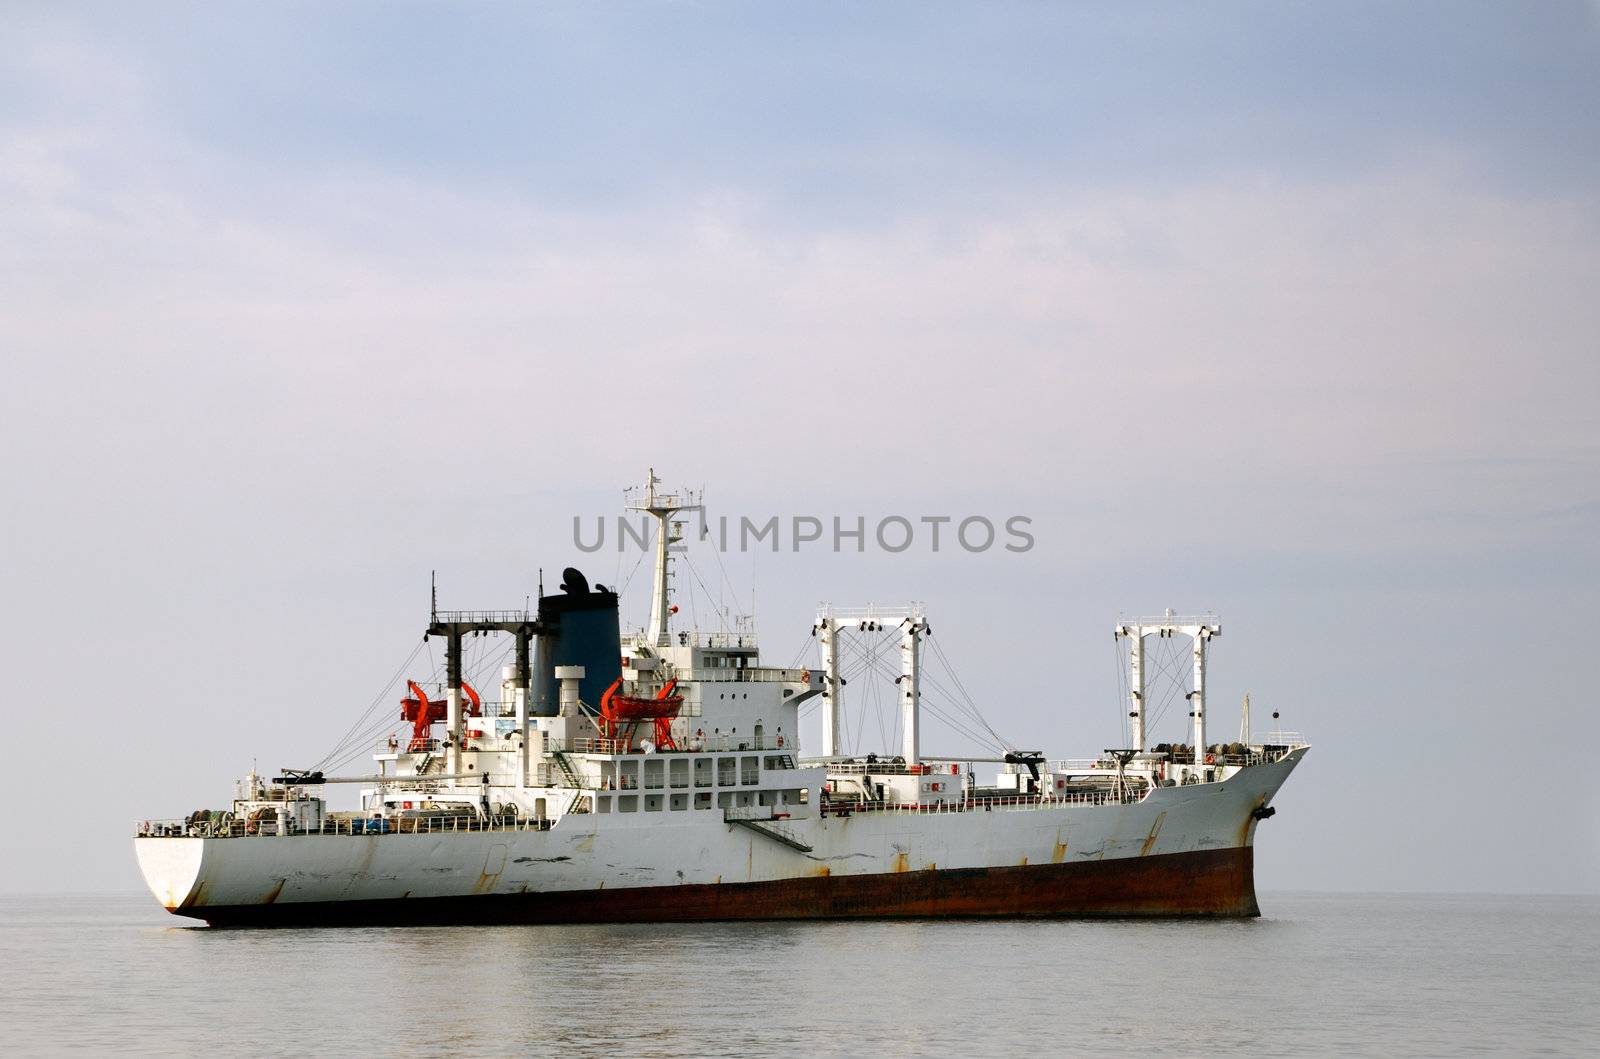 Image shows a white merchant ship floating over calm waters